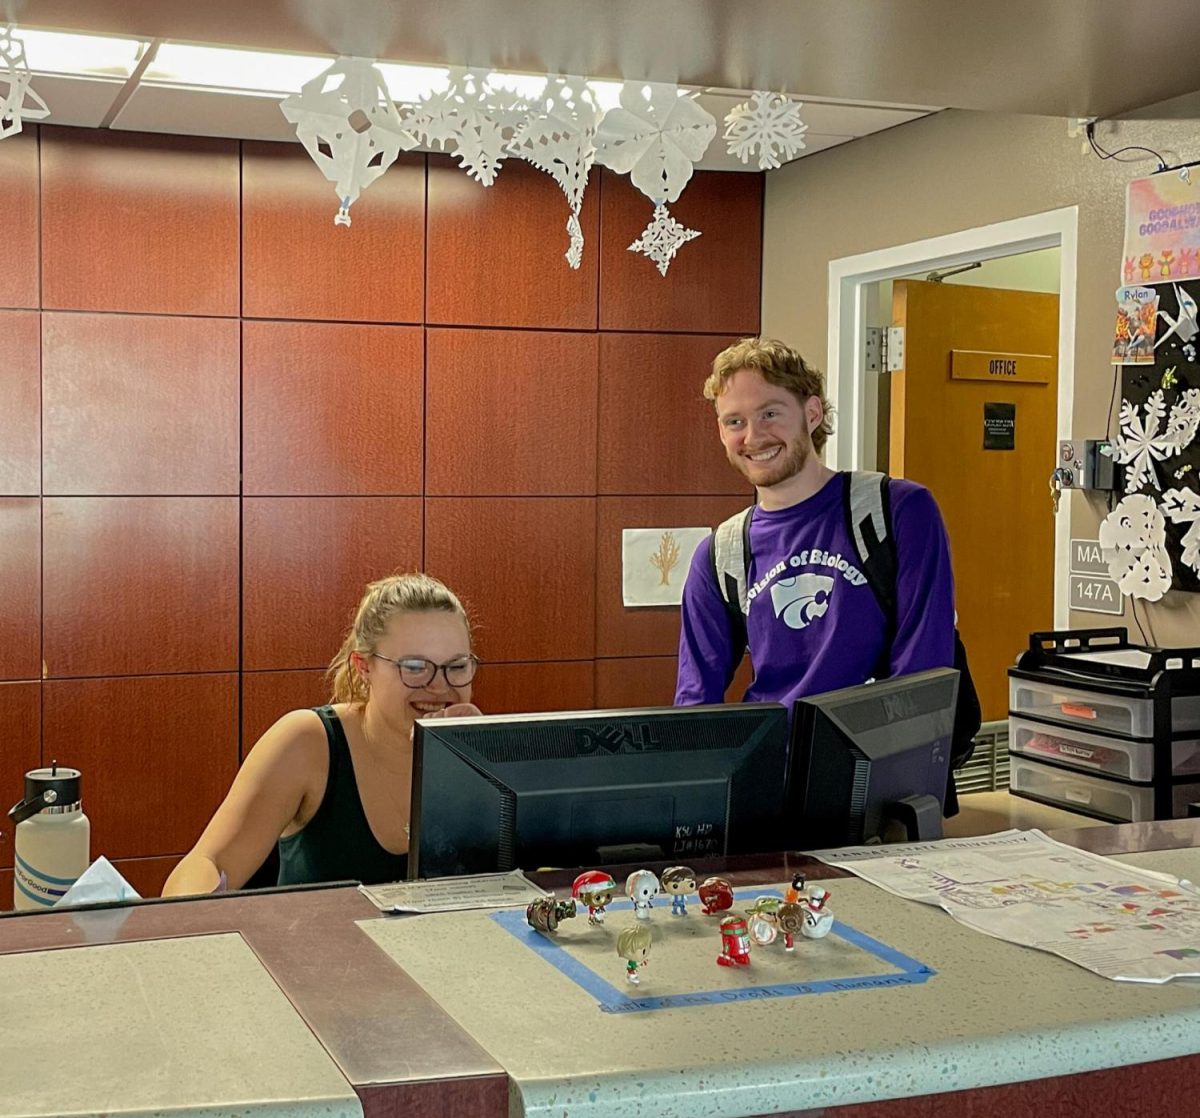 While working at the front desk of Goodnow Hall, two Resident Assistants converse. Goodnow Hall is one dorm option for on-campus living.